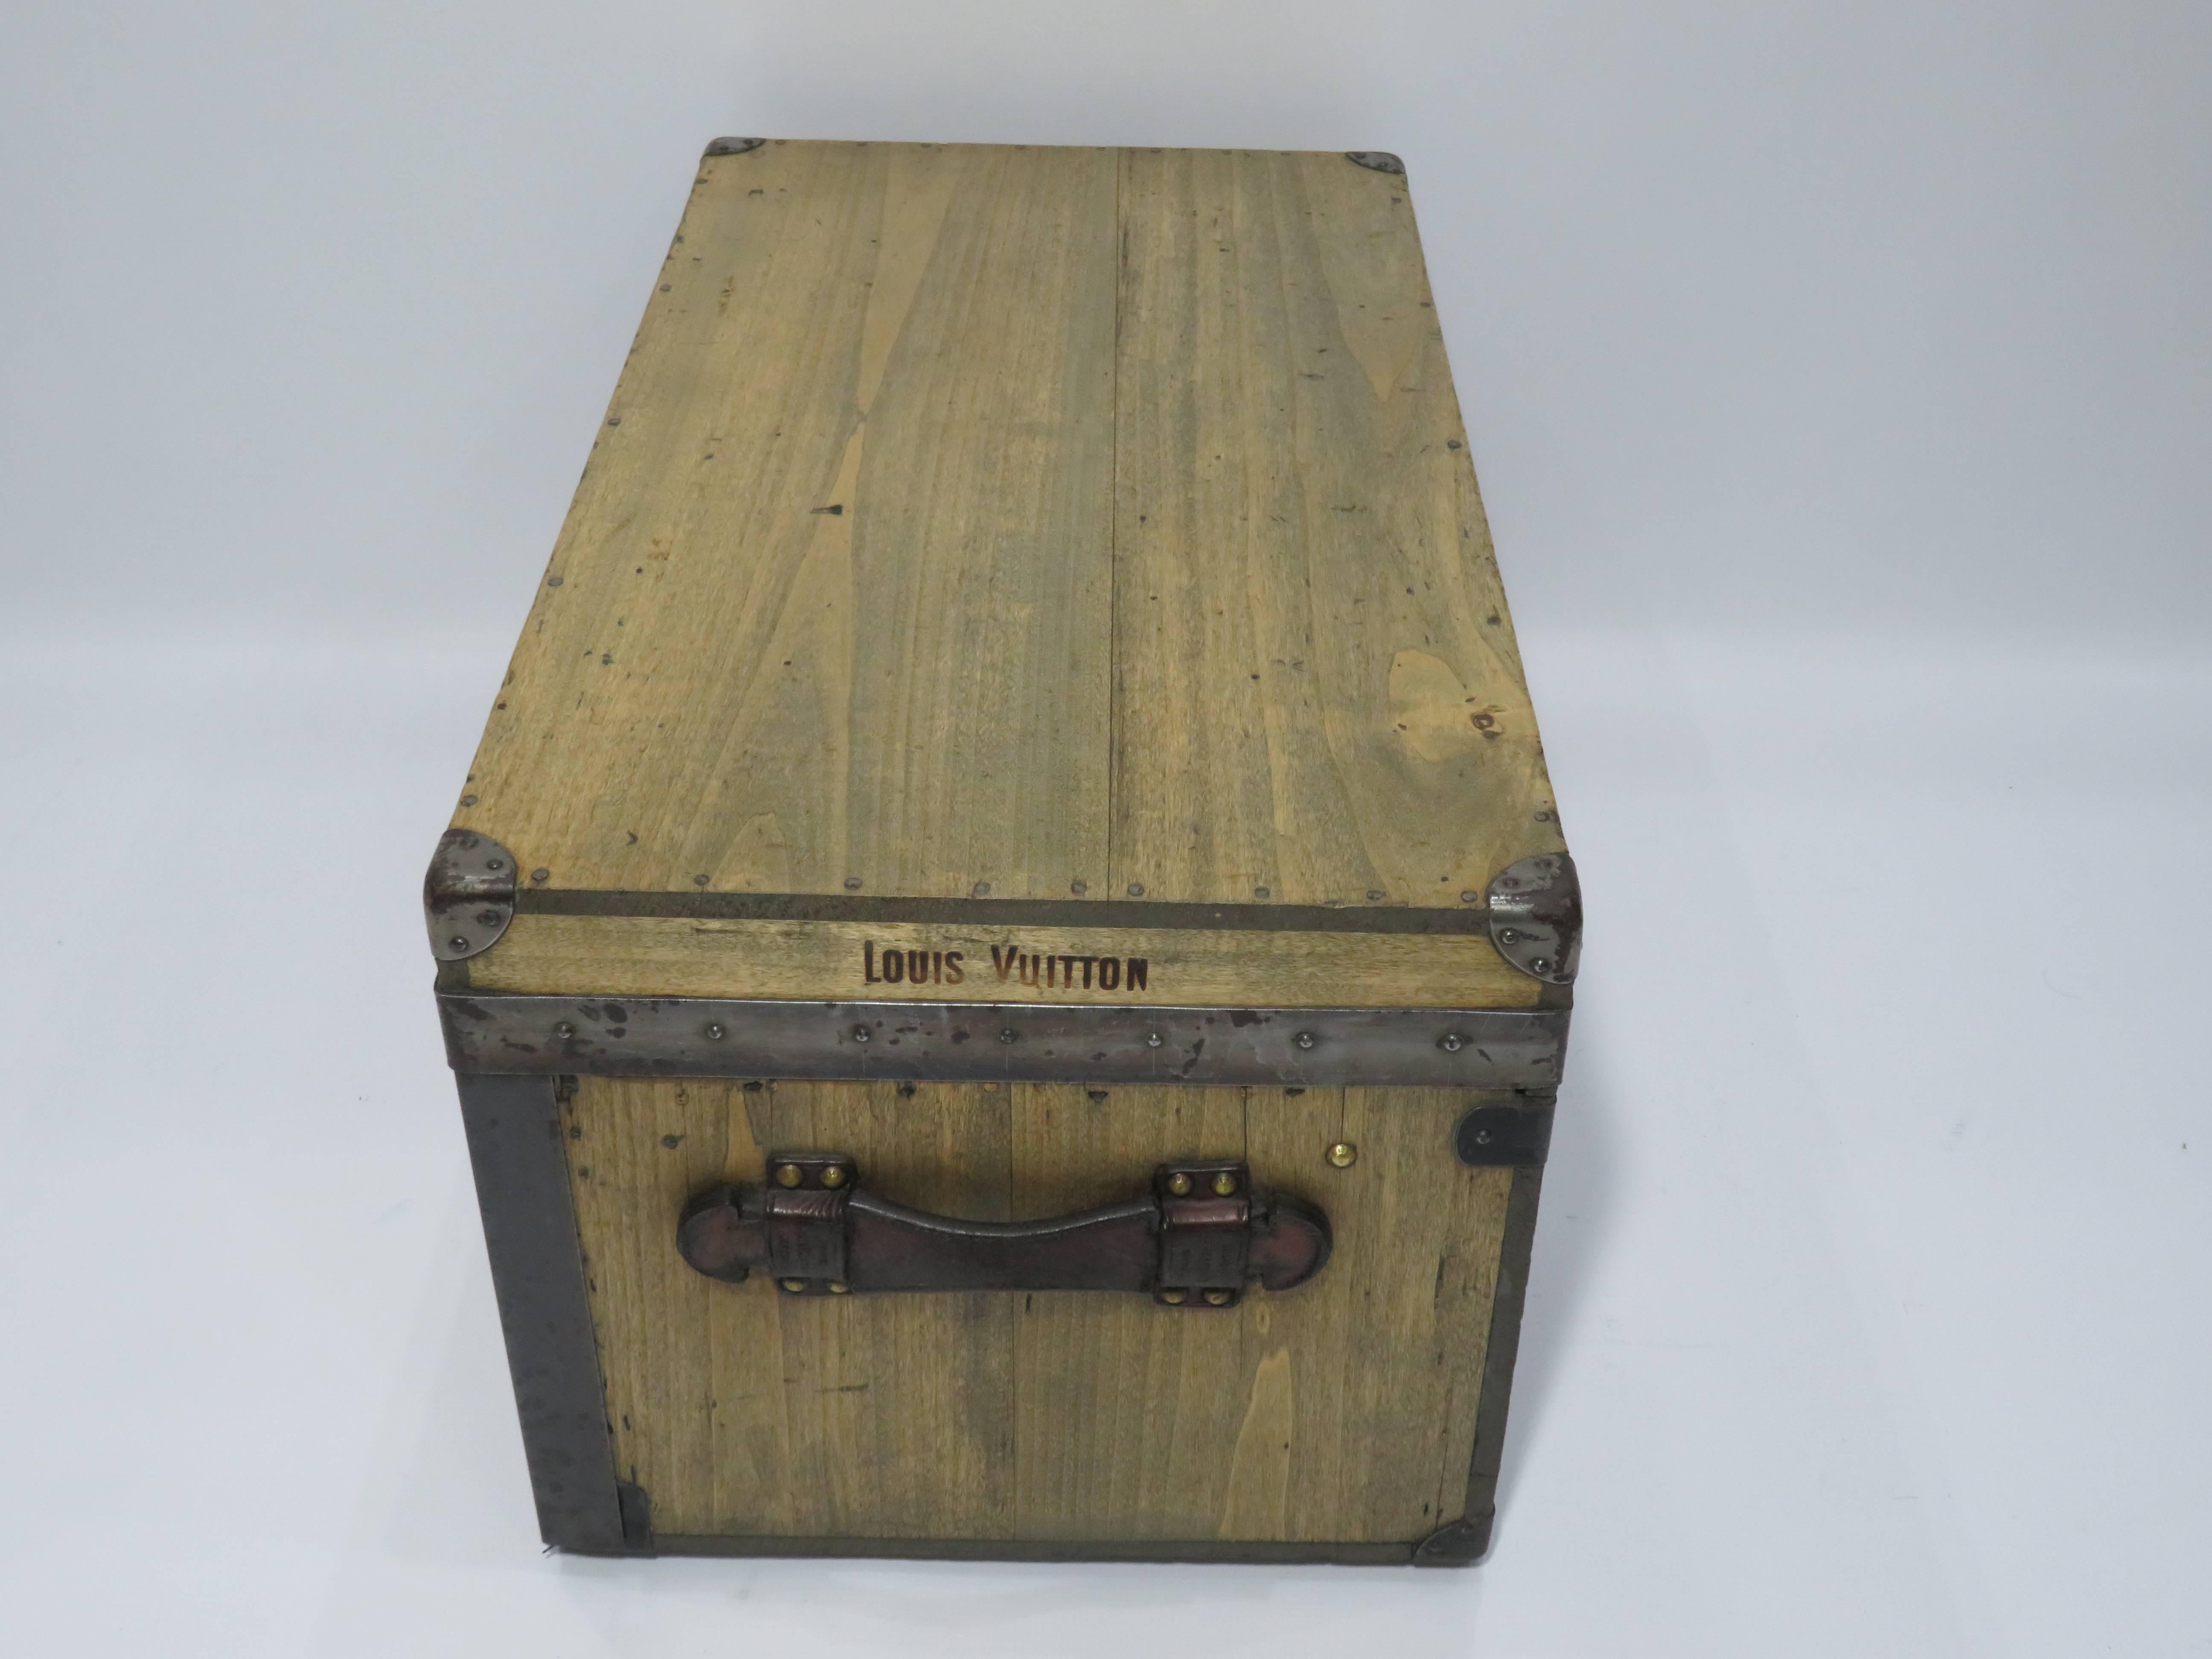 For sale a rare wooden tool box by Louis Vuitton made in 1900s.
Unusual design and shape, a rare find in very good condition.